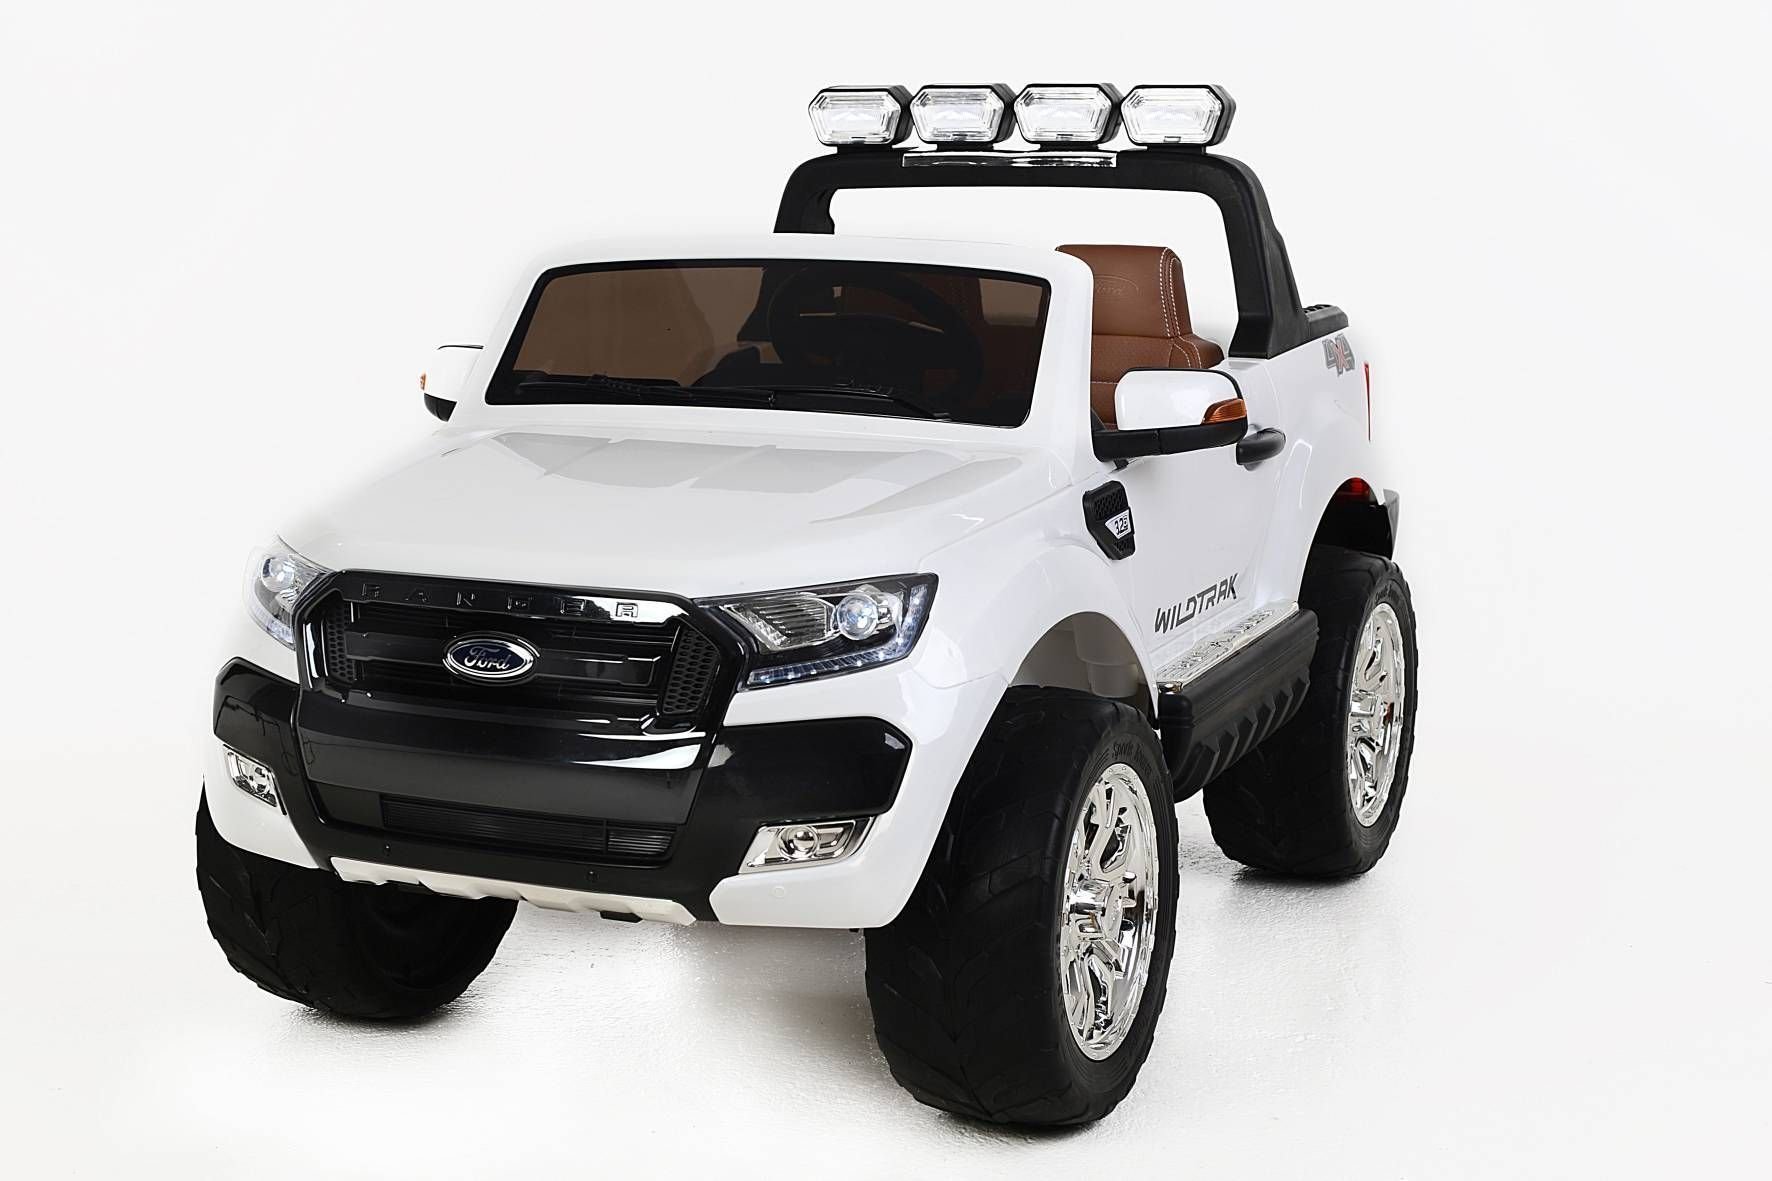 Electric Toy Car Beneo Ford Ranger Wildtrak 4X4 White Electric Toy Car